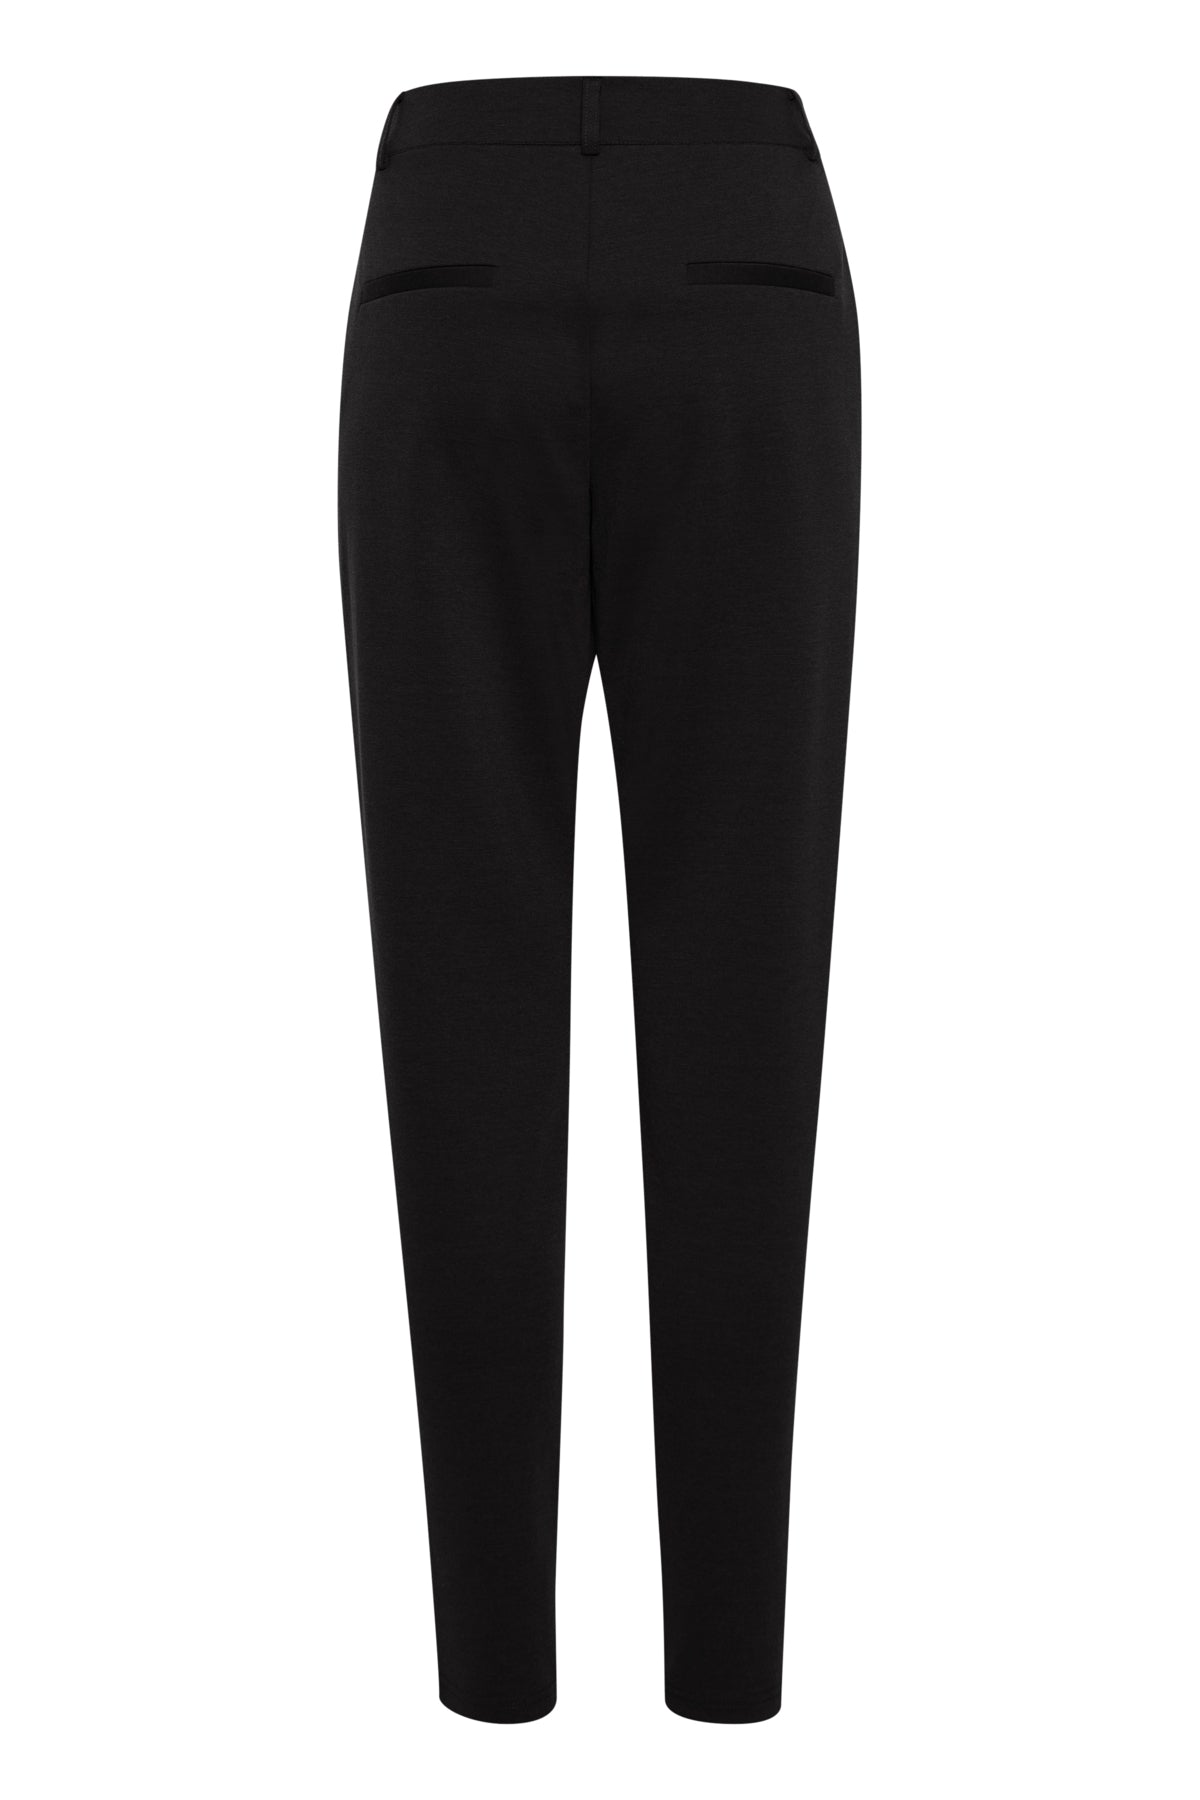 Buy ONLY Women Casual Black Trousers online